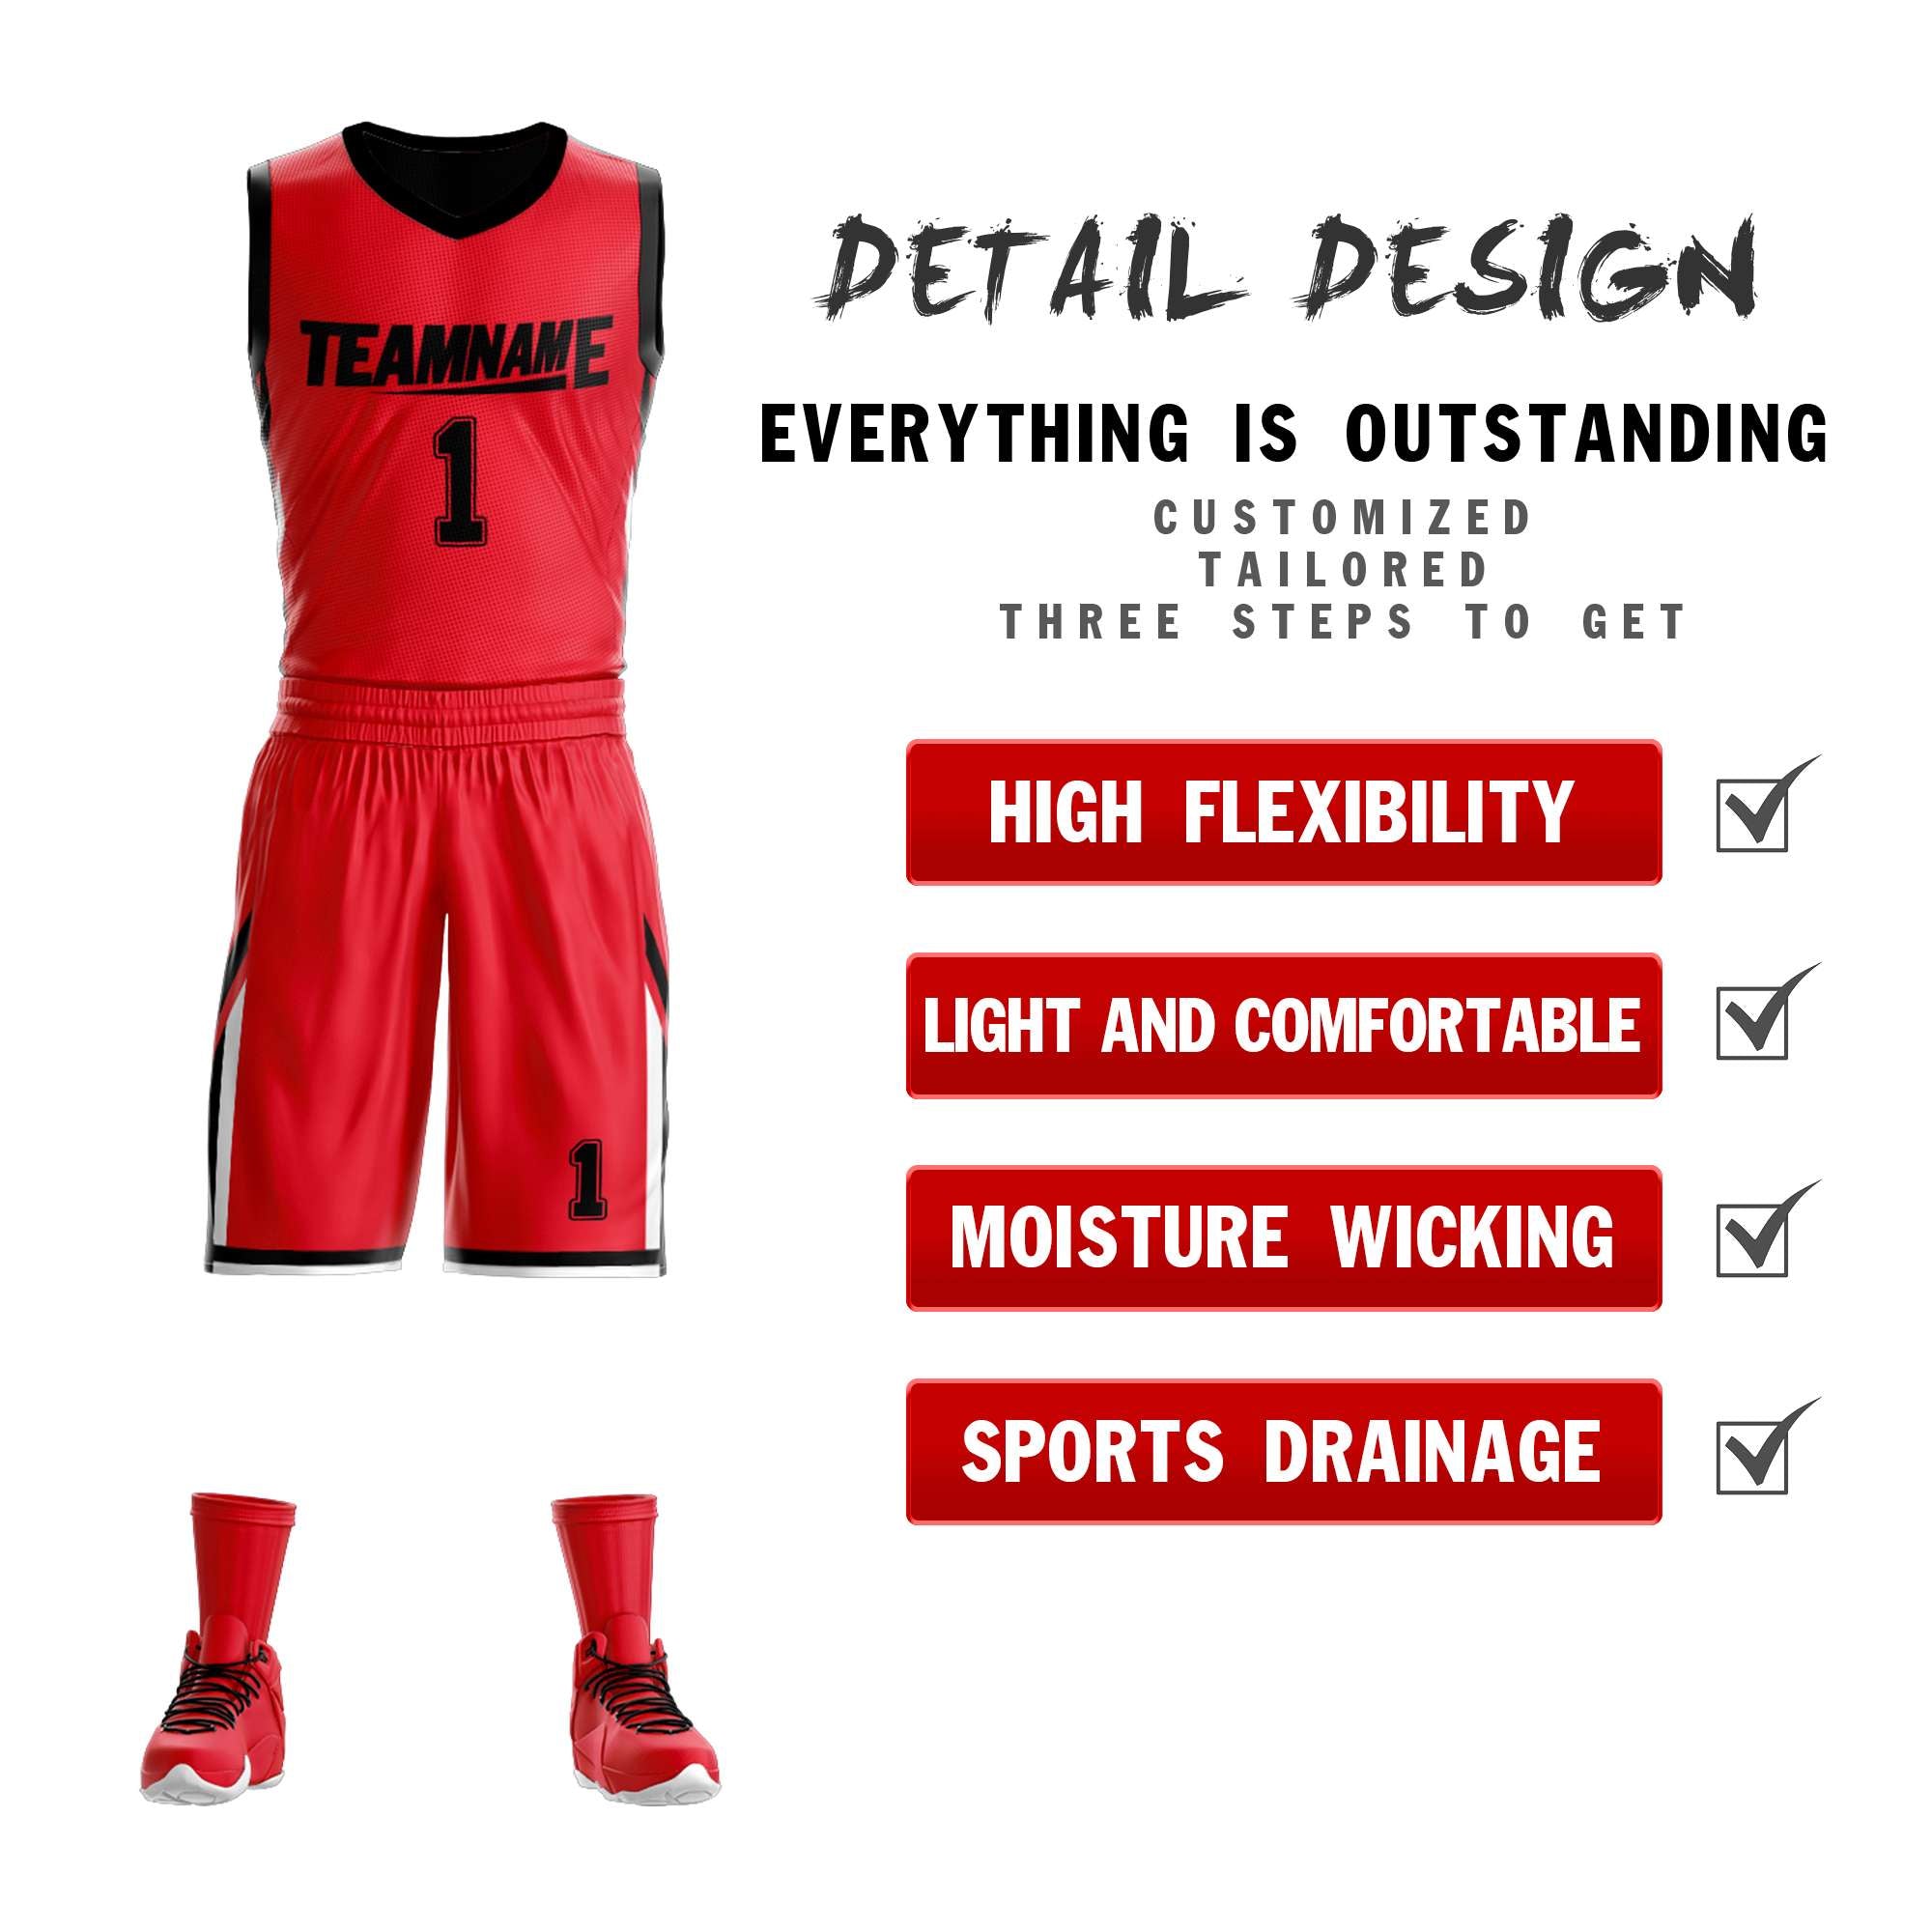 red and black reversible basketball jersey for team